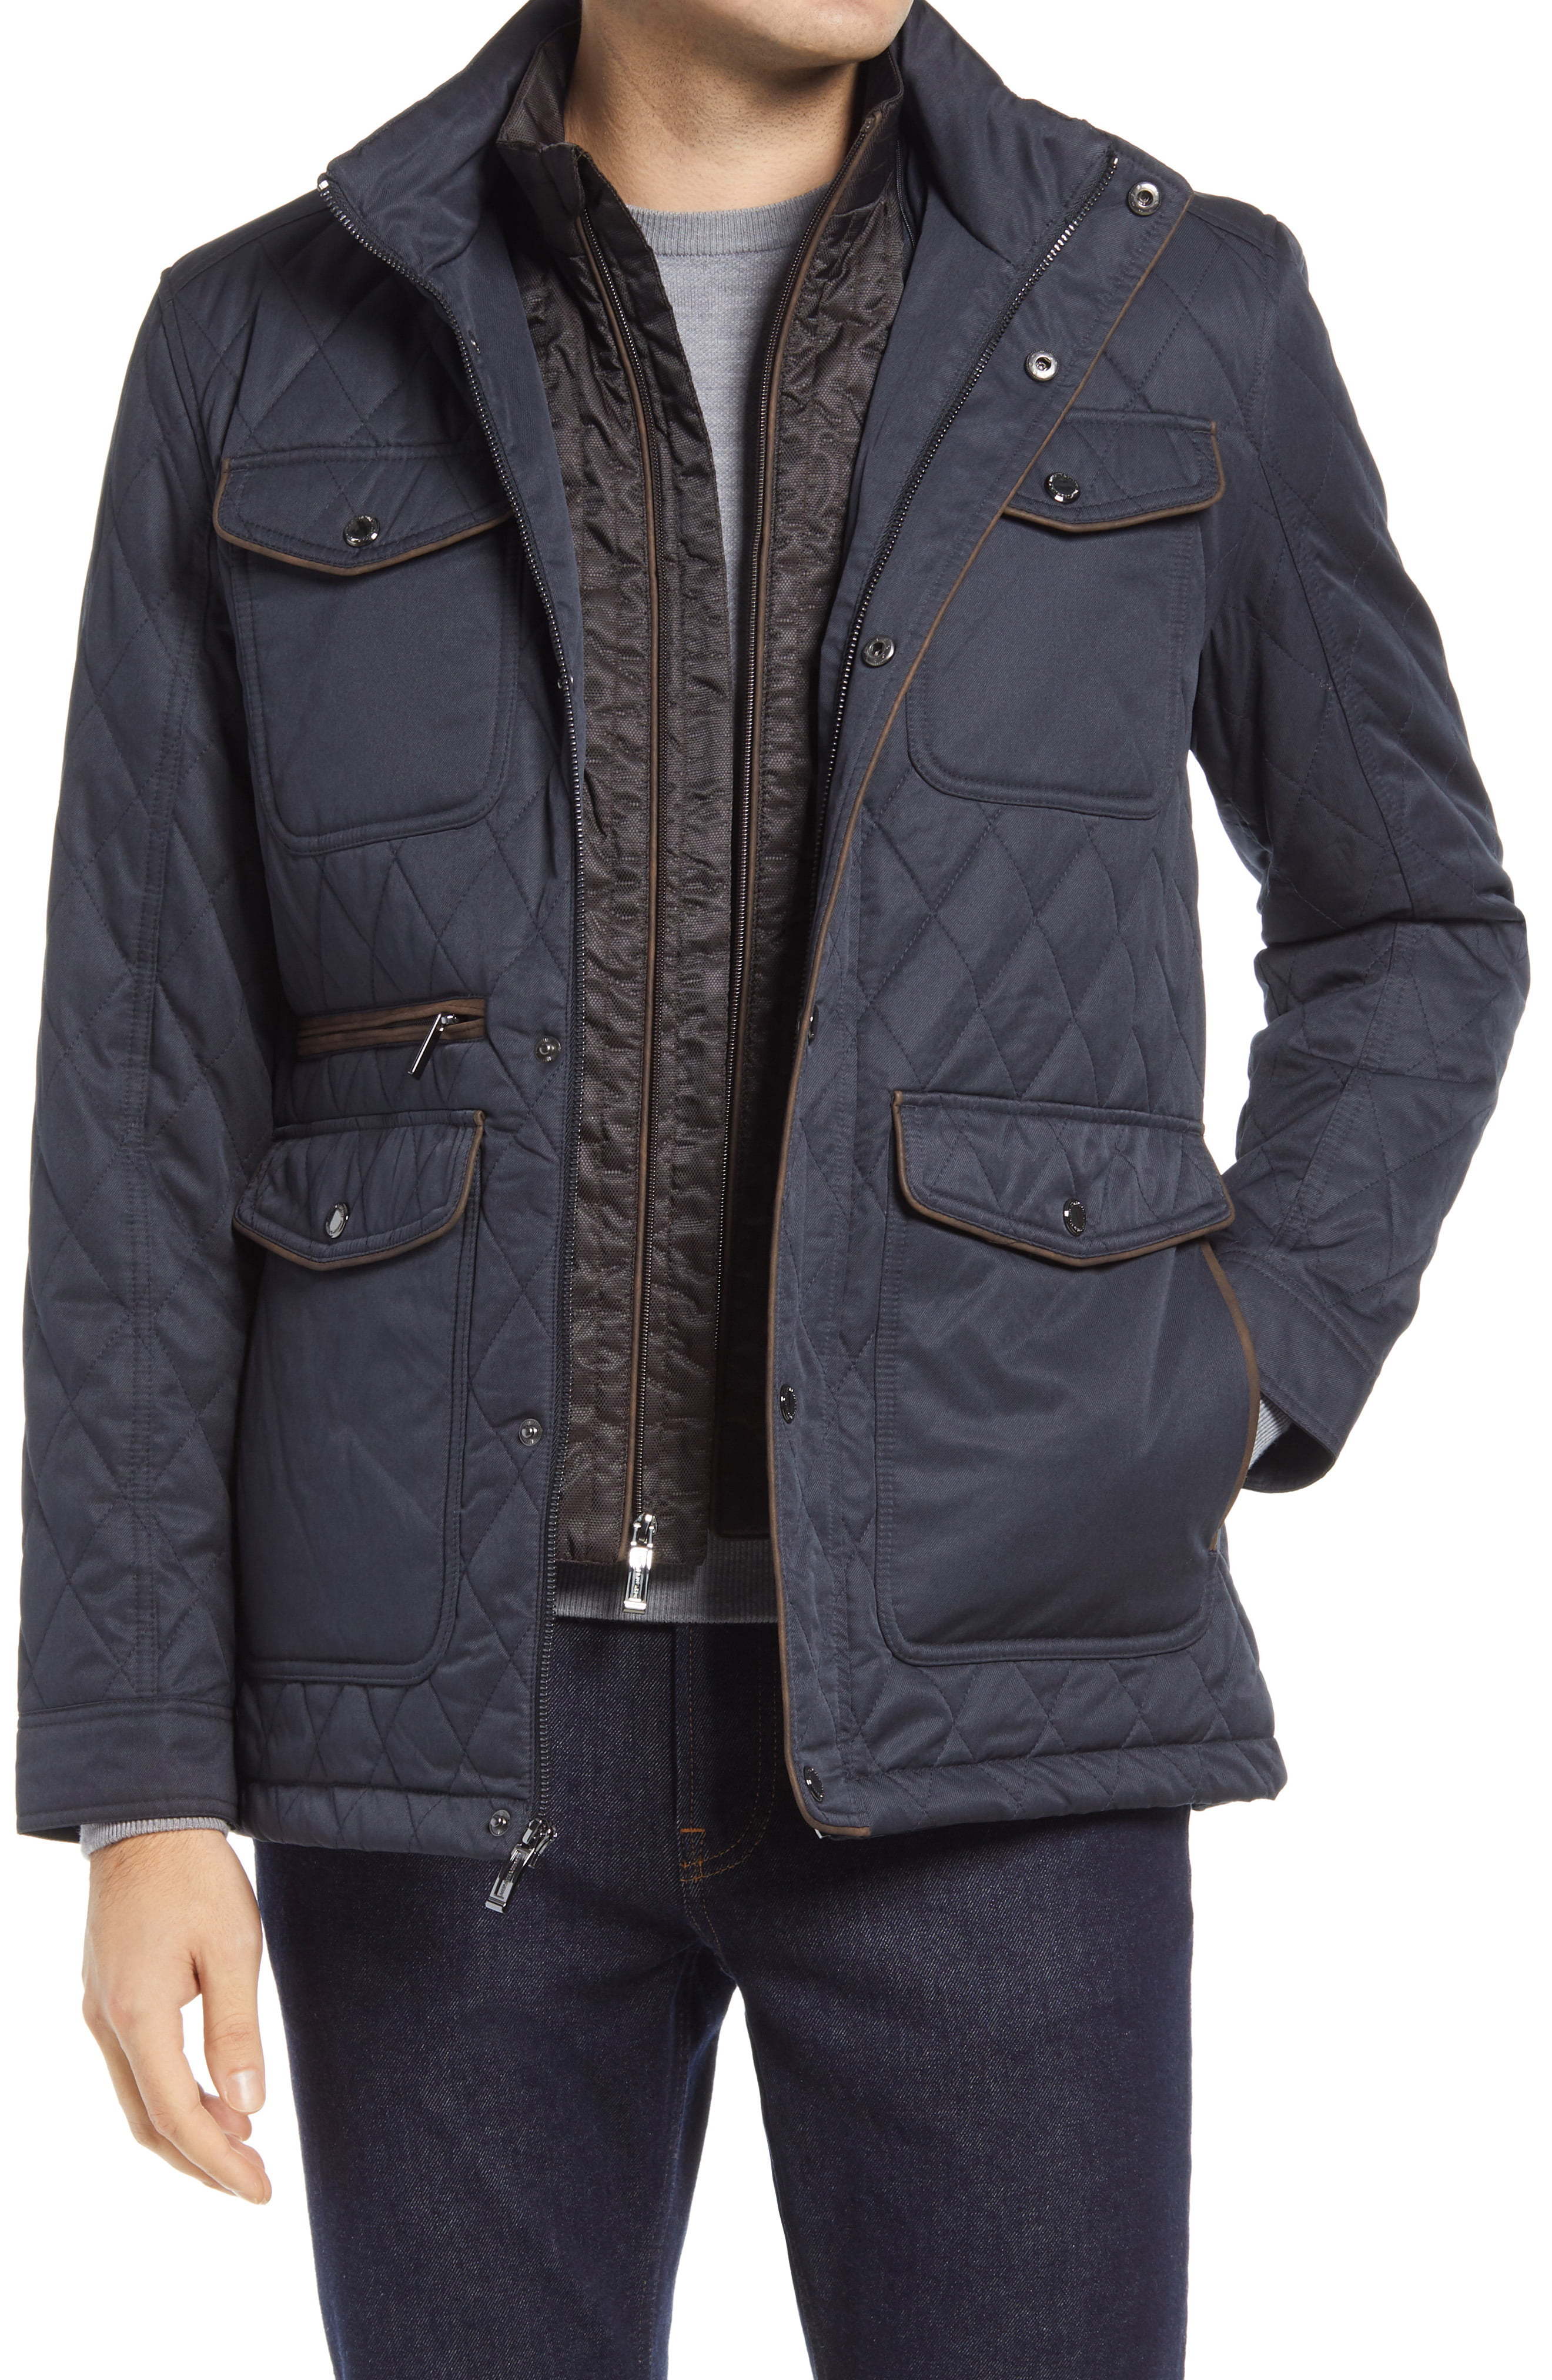 Johnston & Murphy Water Resistant Quilted Jacket, $289 | Nordstrom ...